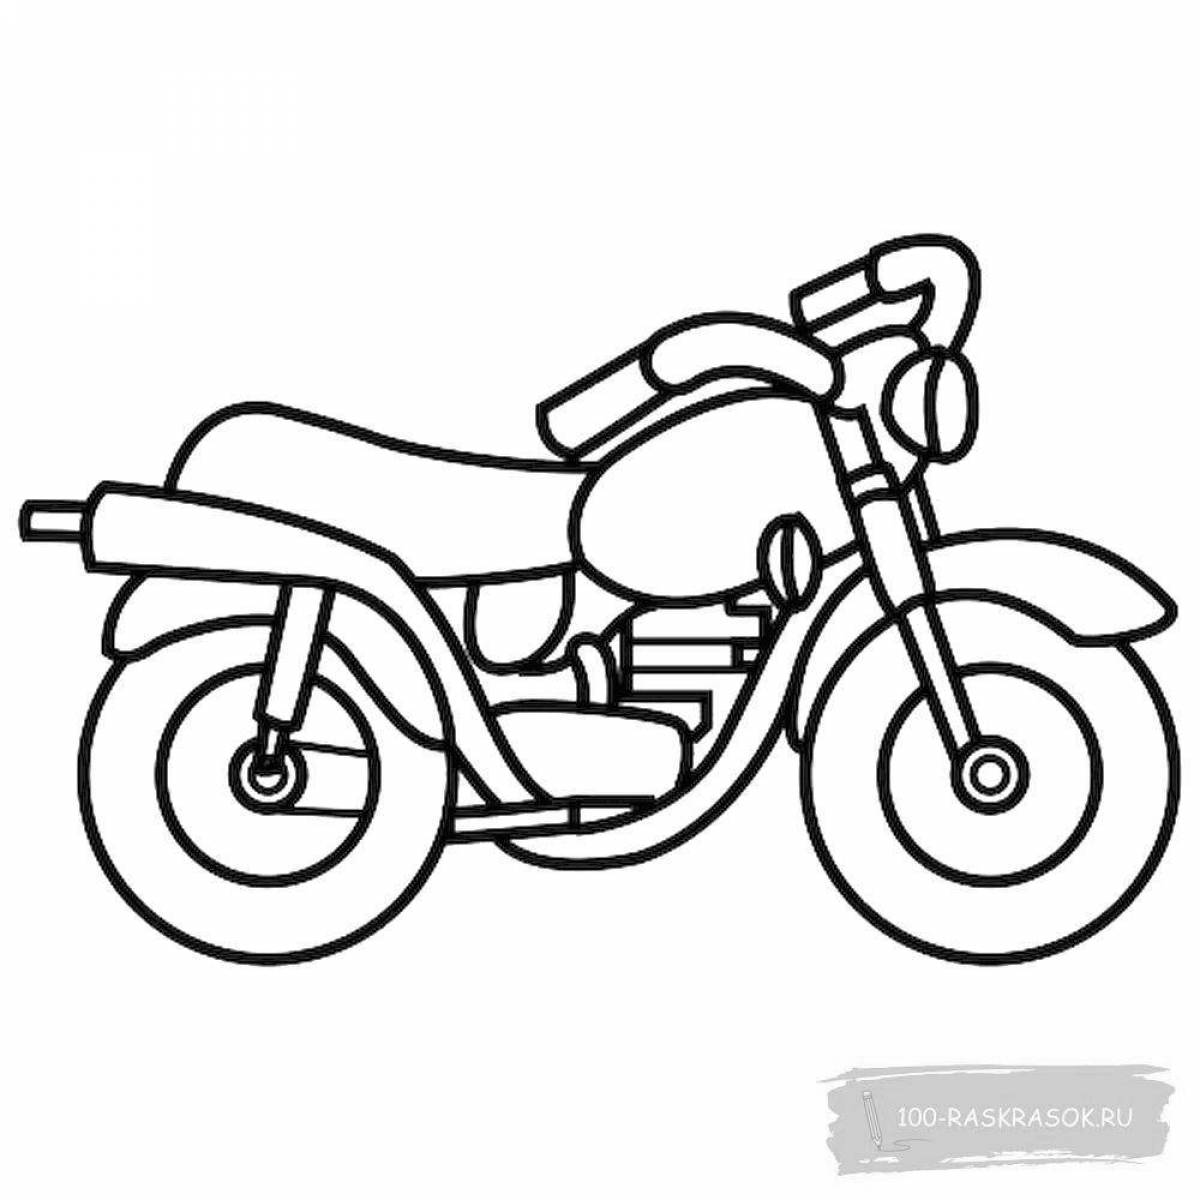 A funny motorcycle coloring book for children 4-5 years old